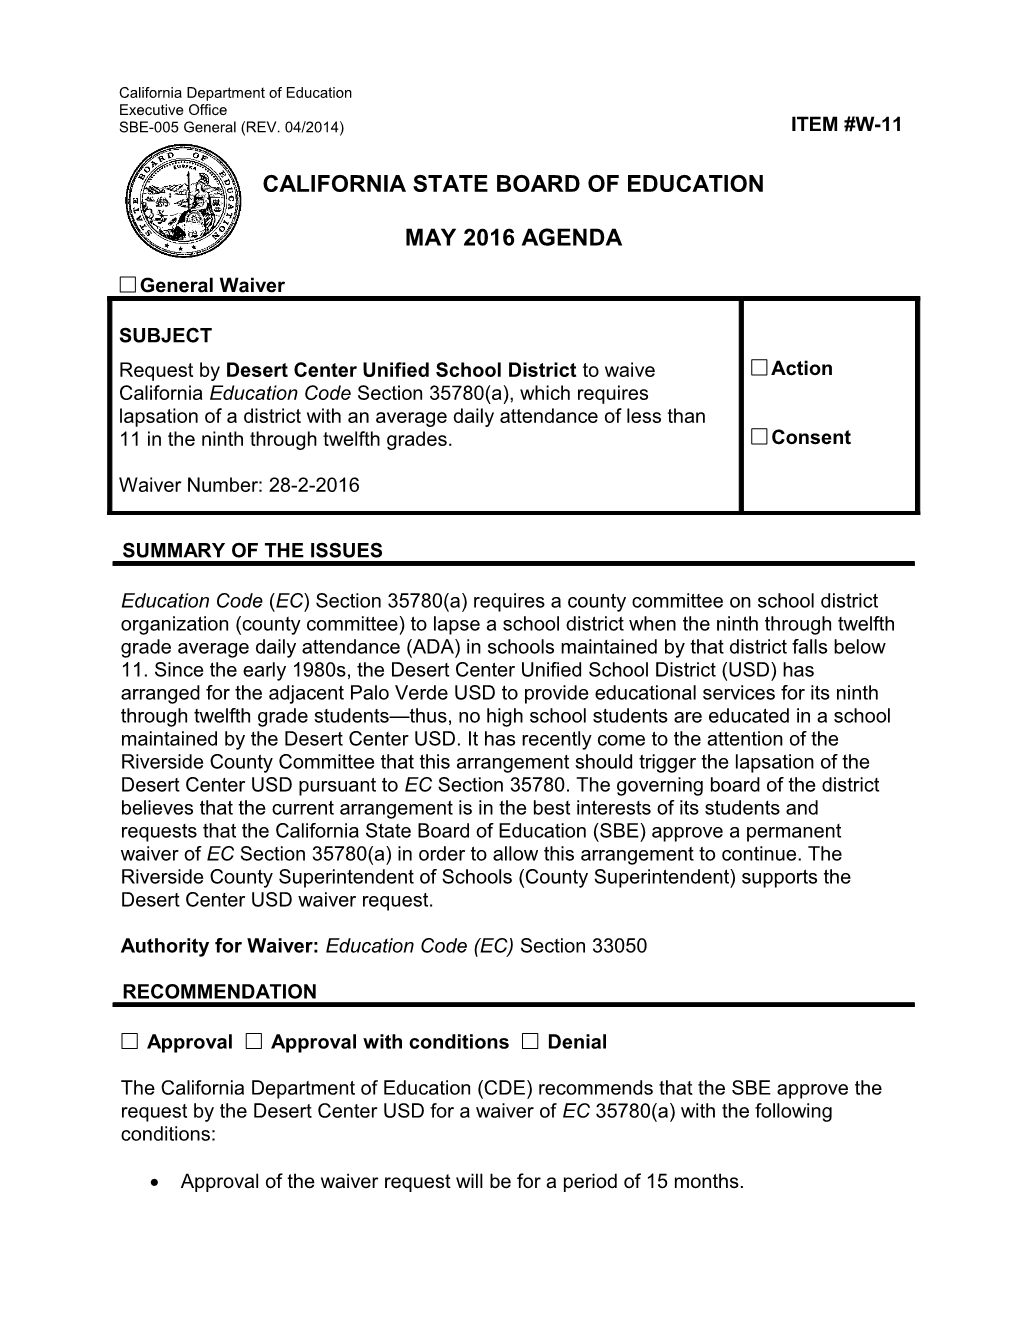 May 2016 Waiver Item W-11 - Meeting Agendas (CA State Board of Education)